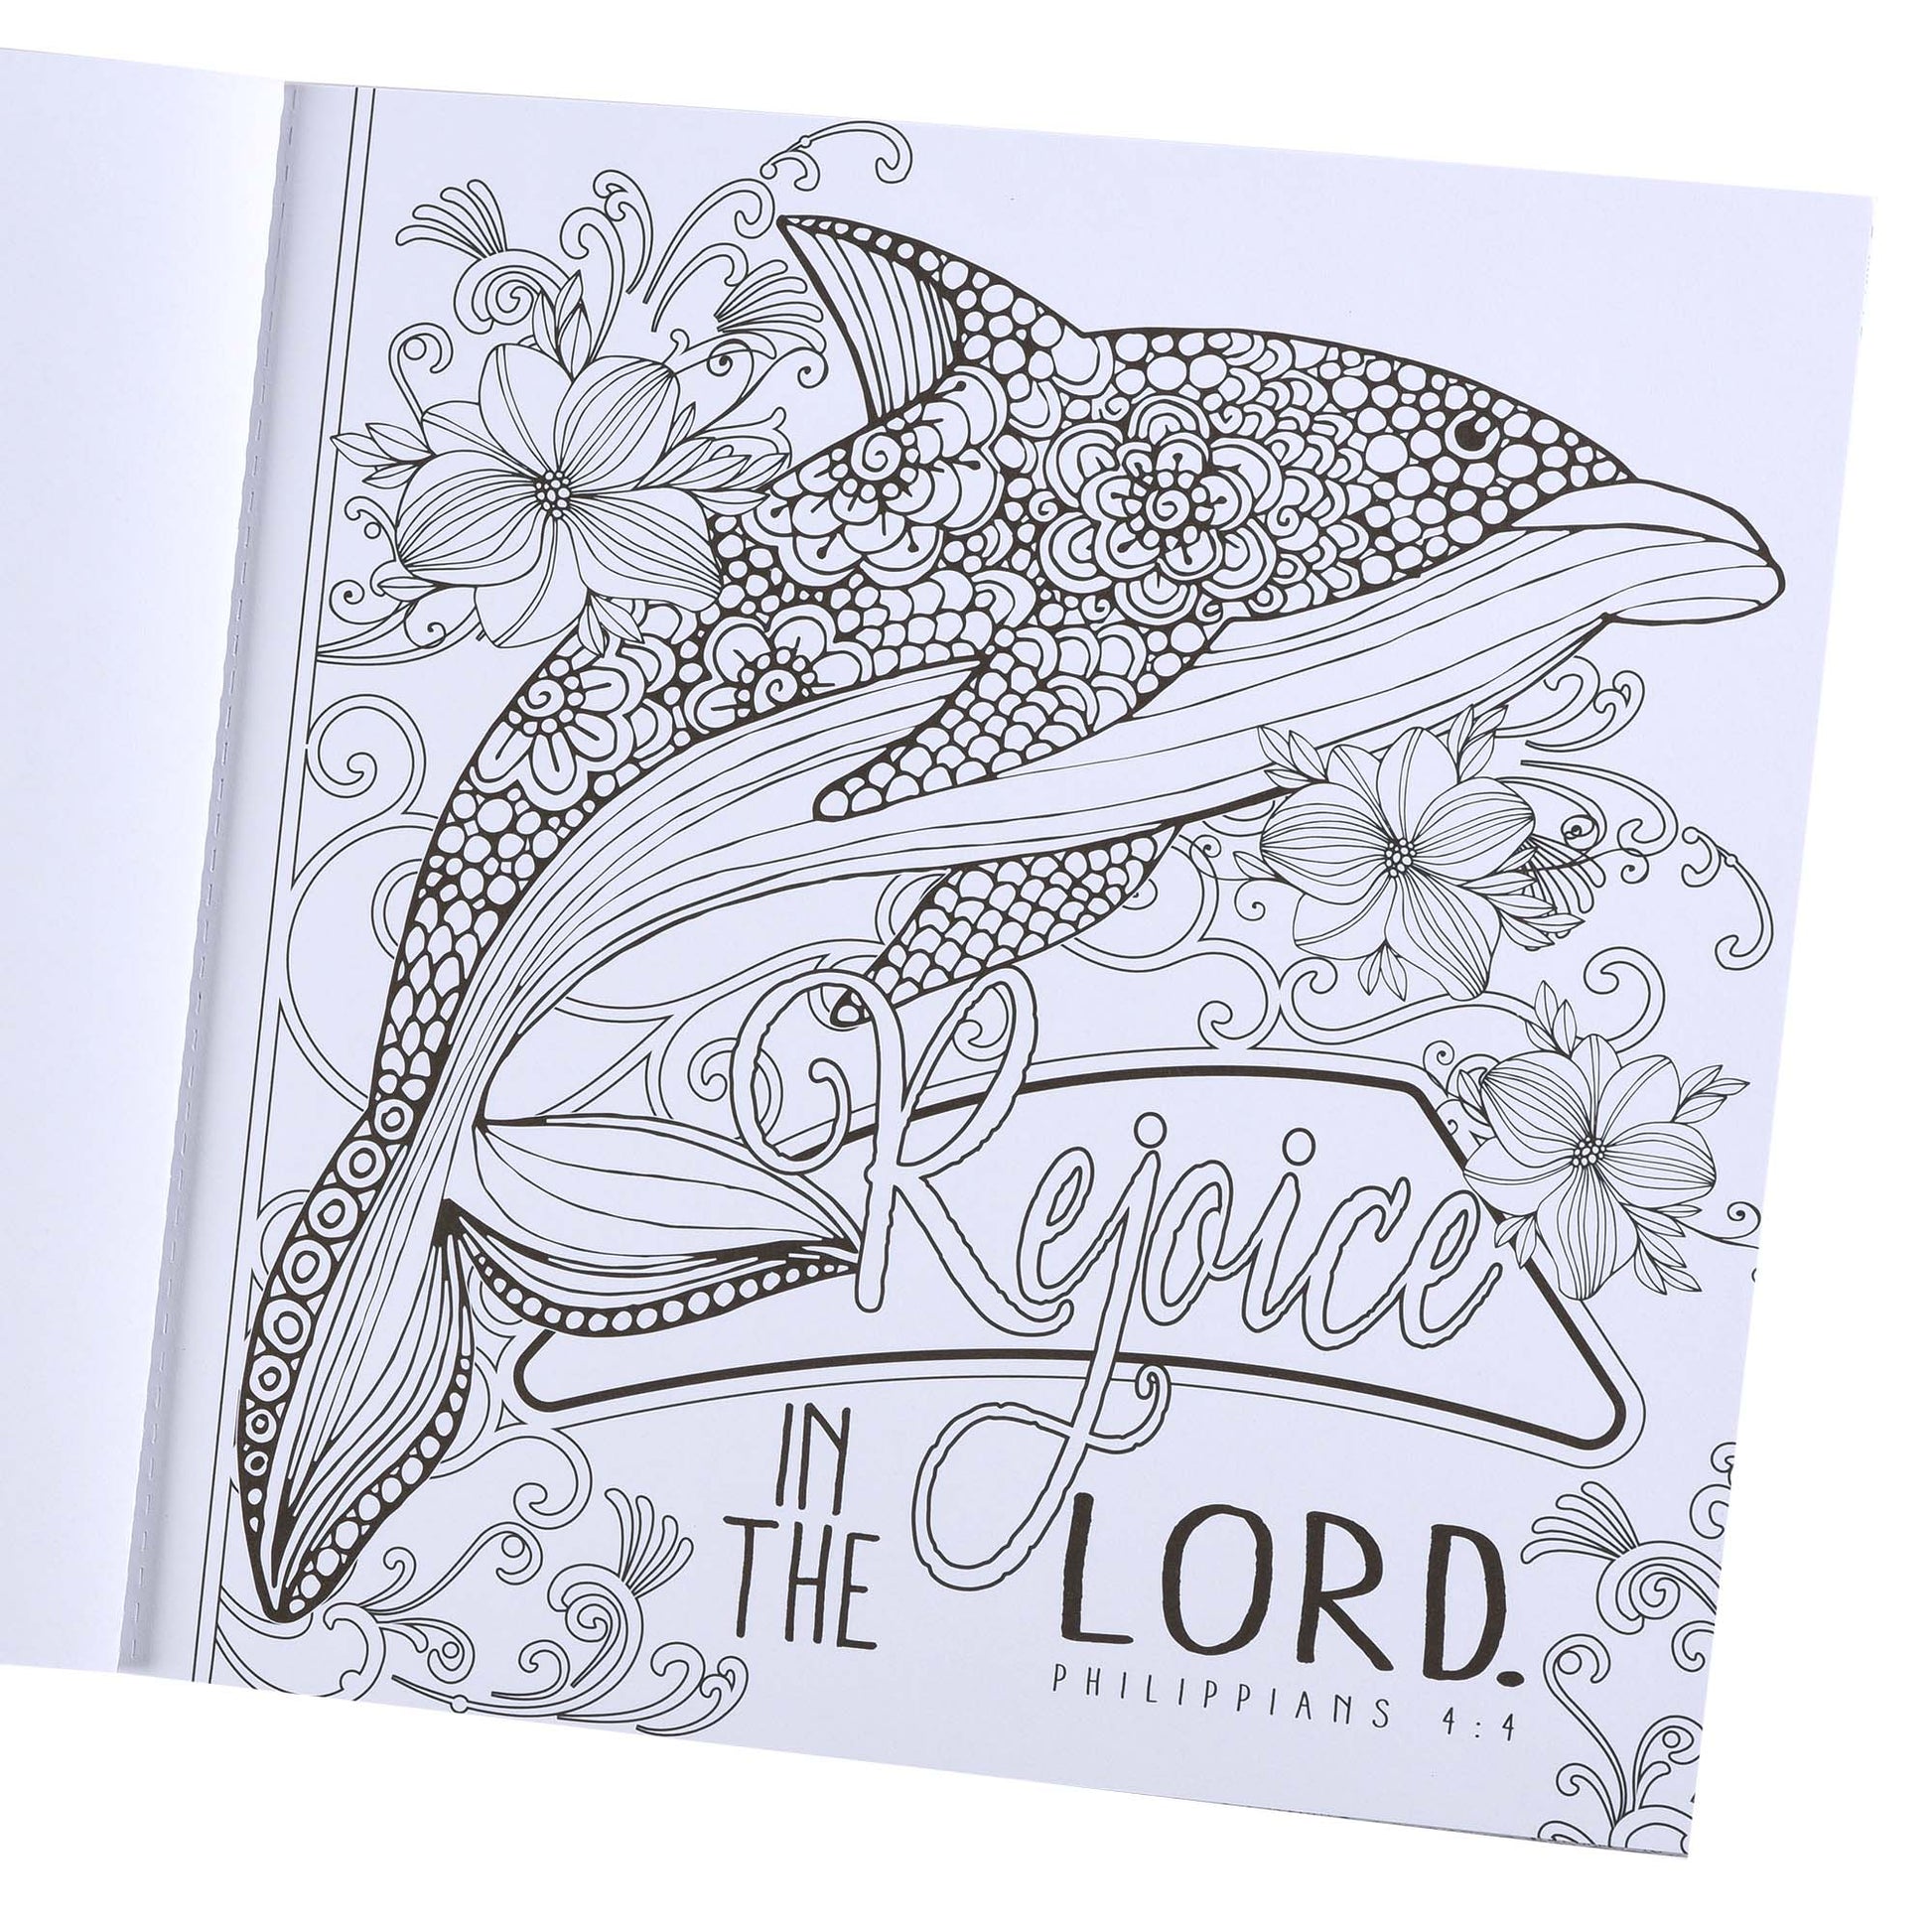 We Have This Hope Inspirational Colouring Book for Adults - The Christian Gift Company